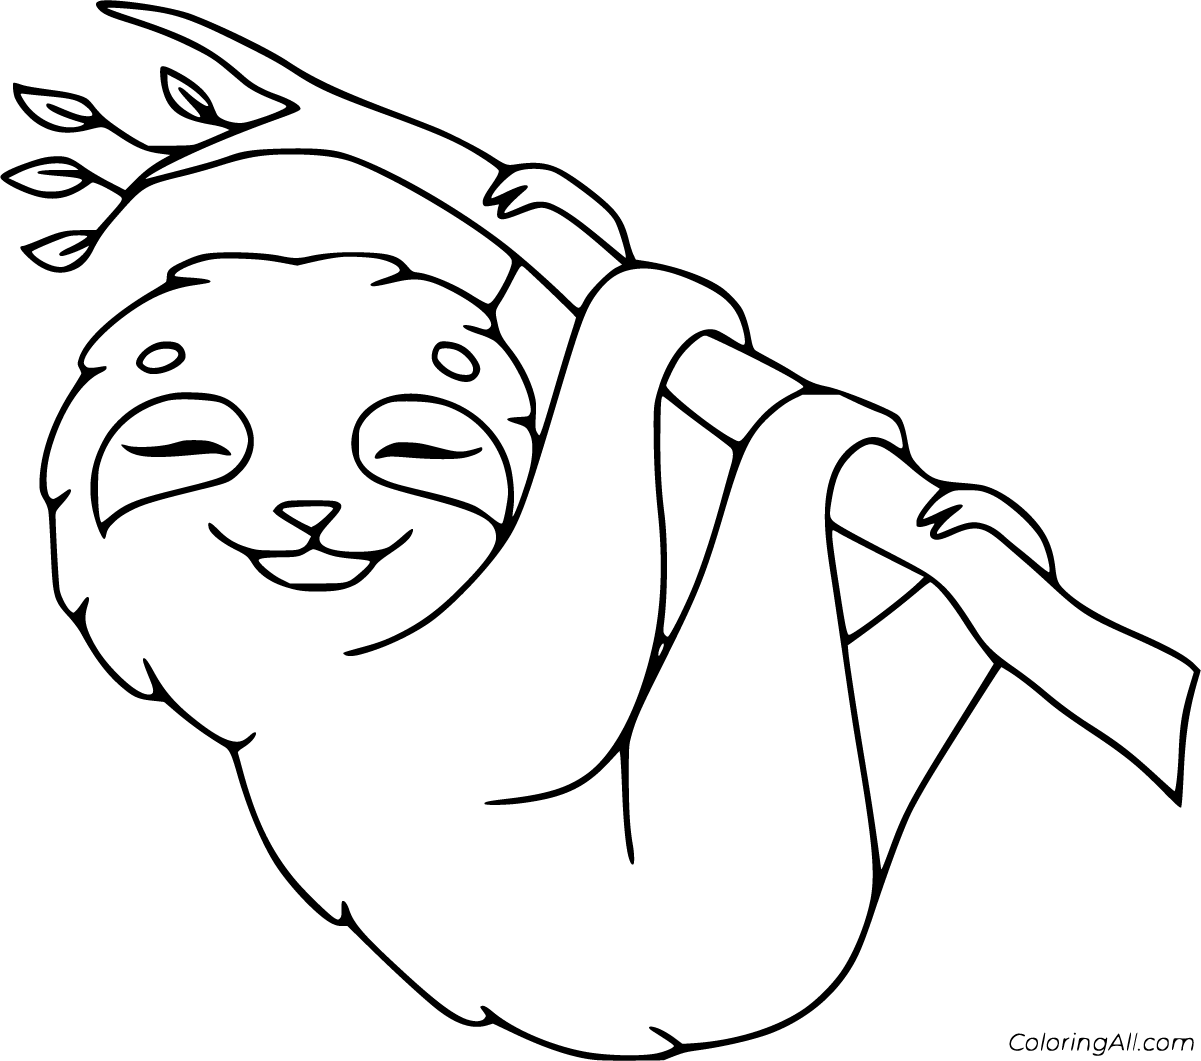 Sloth Coloring Pages ColoringAll